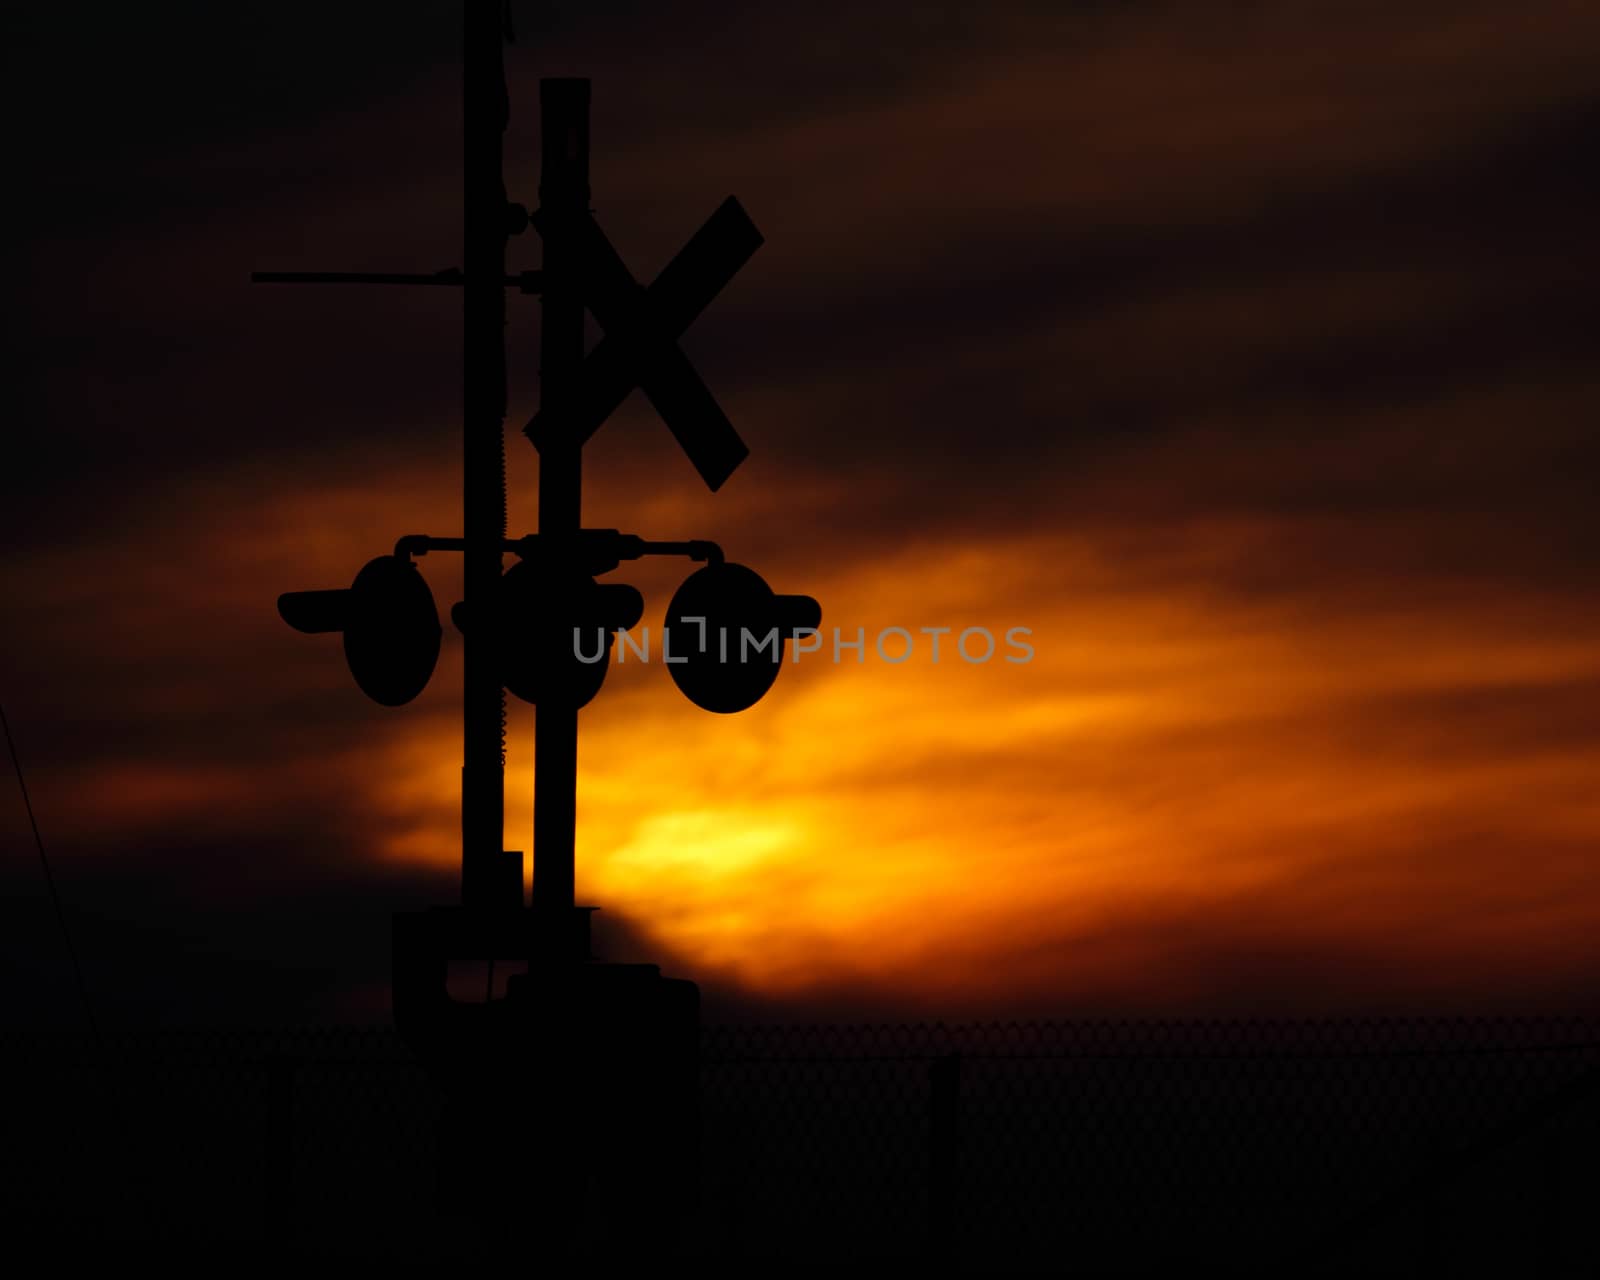 Rail signal silhouette before orange sunset by colintemple